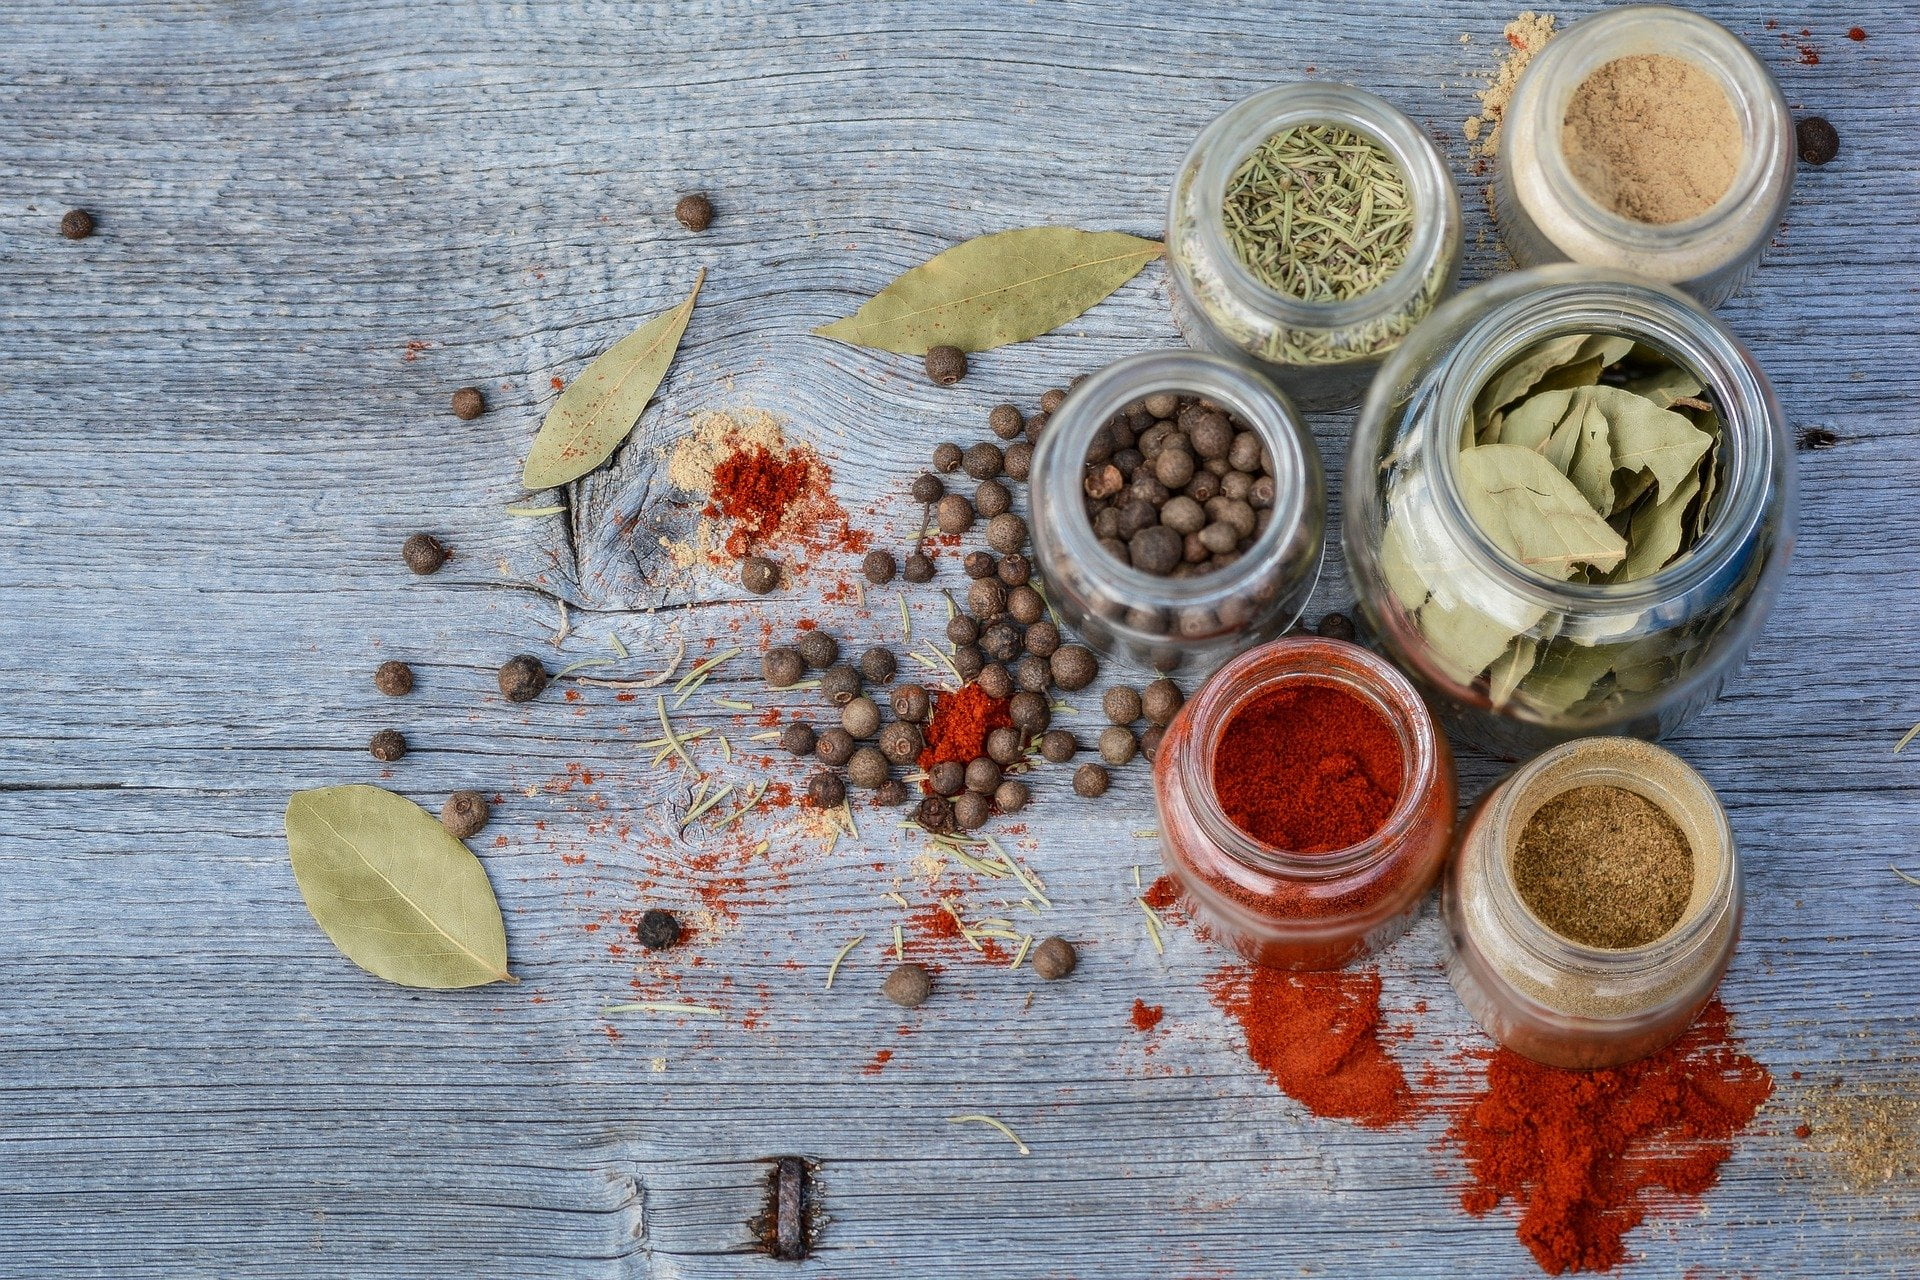 herbs and spices - healthy cretan gastronomy